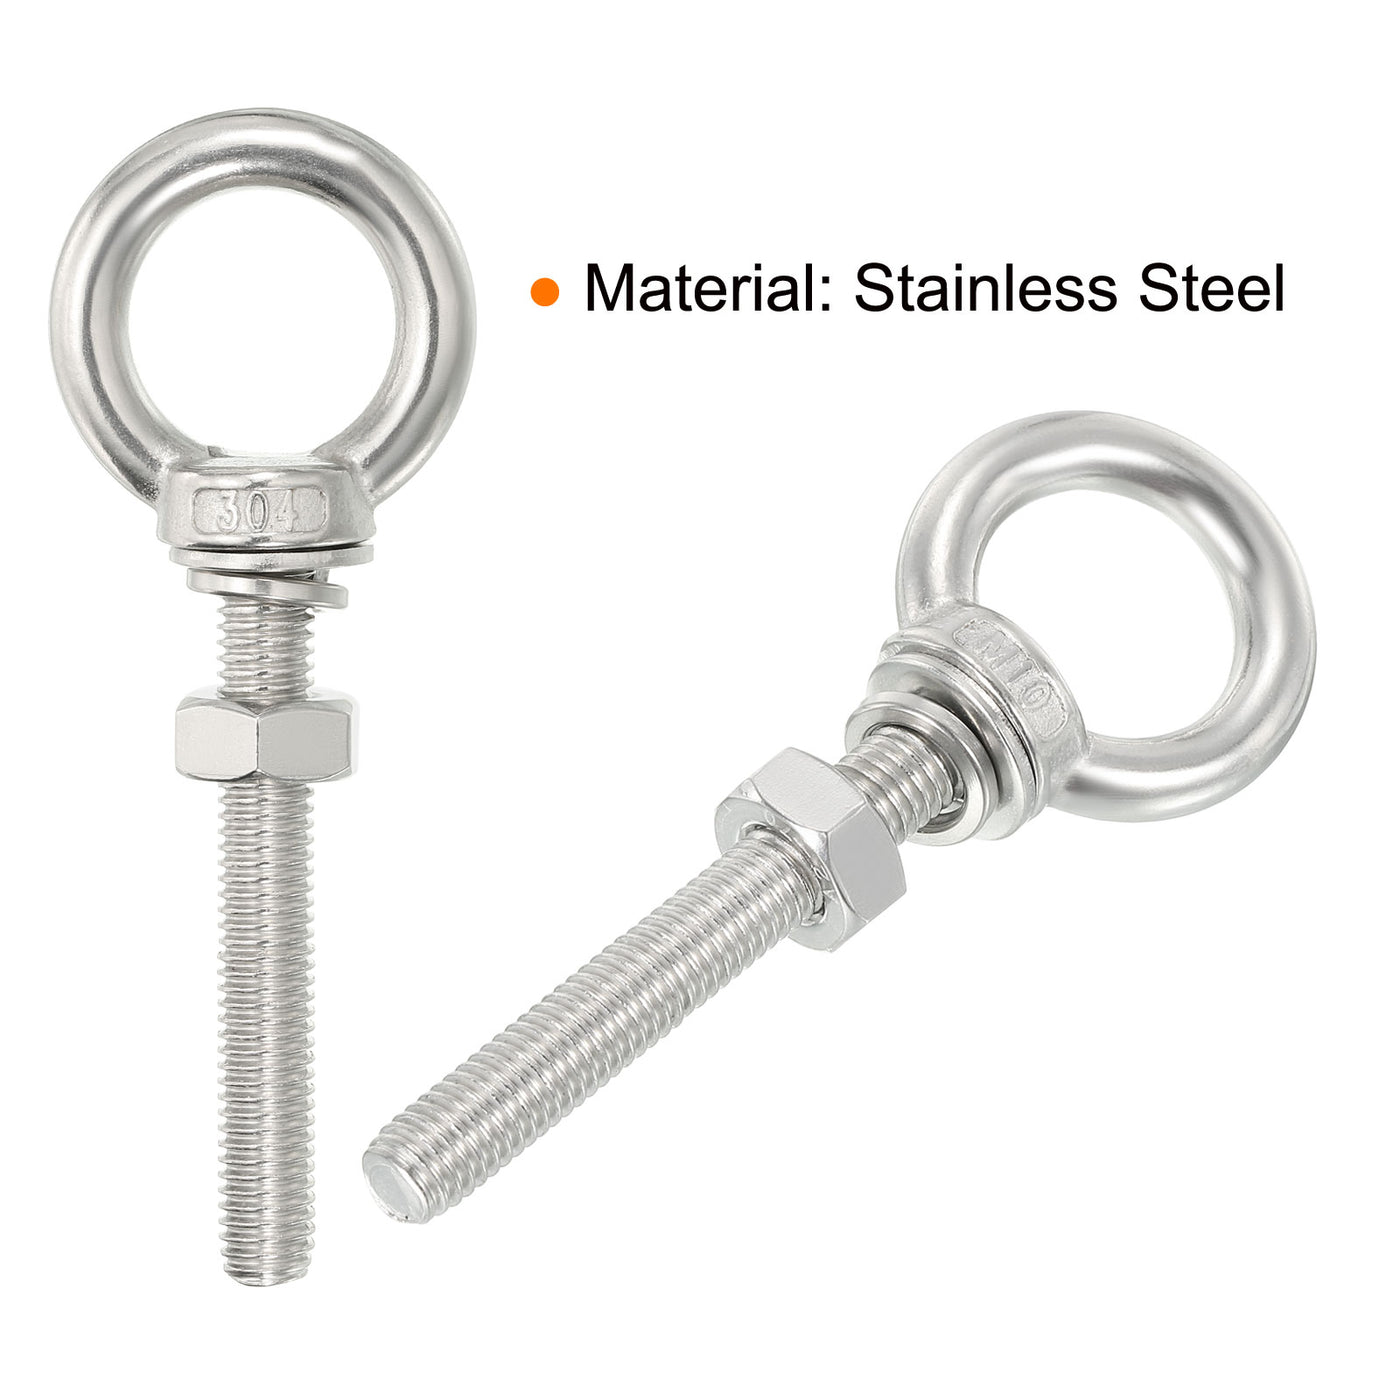 uxcell Uxcell M10x70 3/8"x2.75" Stainless Steel Eye Bolts Threaded Screw Eyebolt Shoulder Ring with Nuts Washers for Lifting Hanging, 2 Set